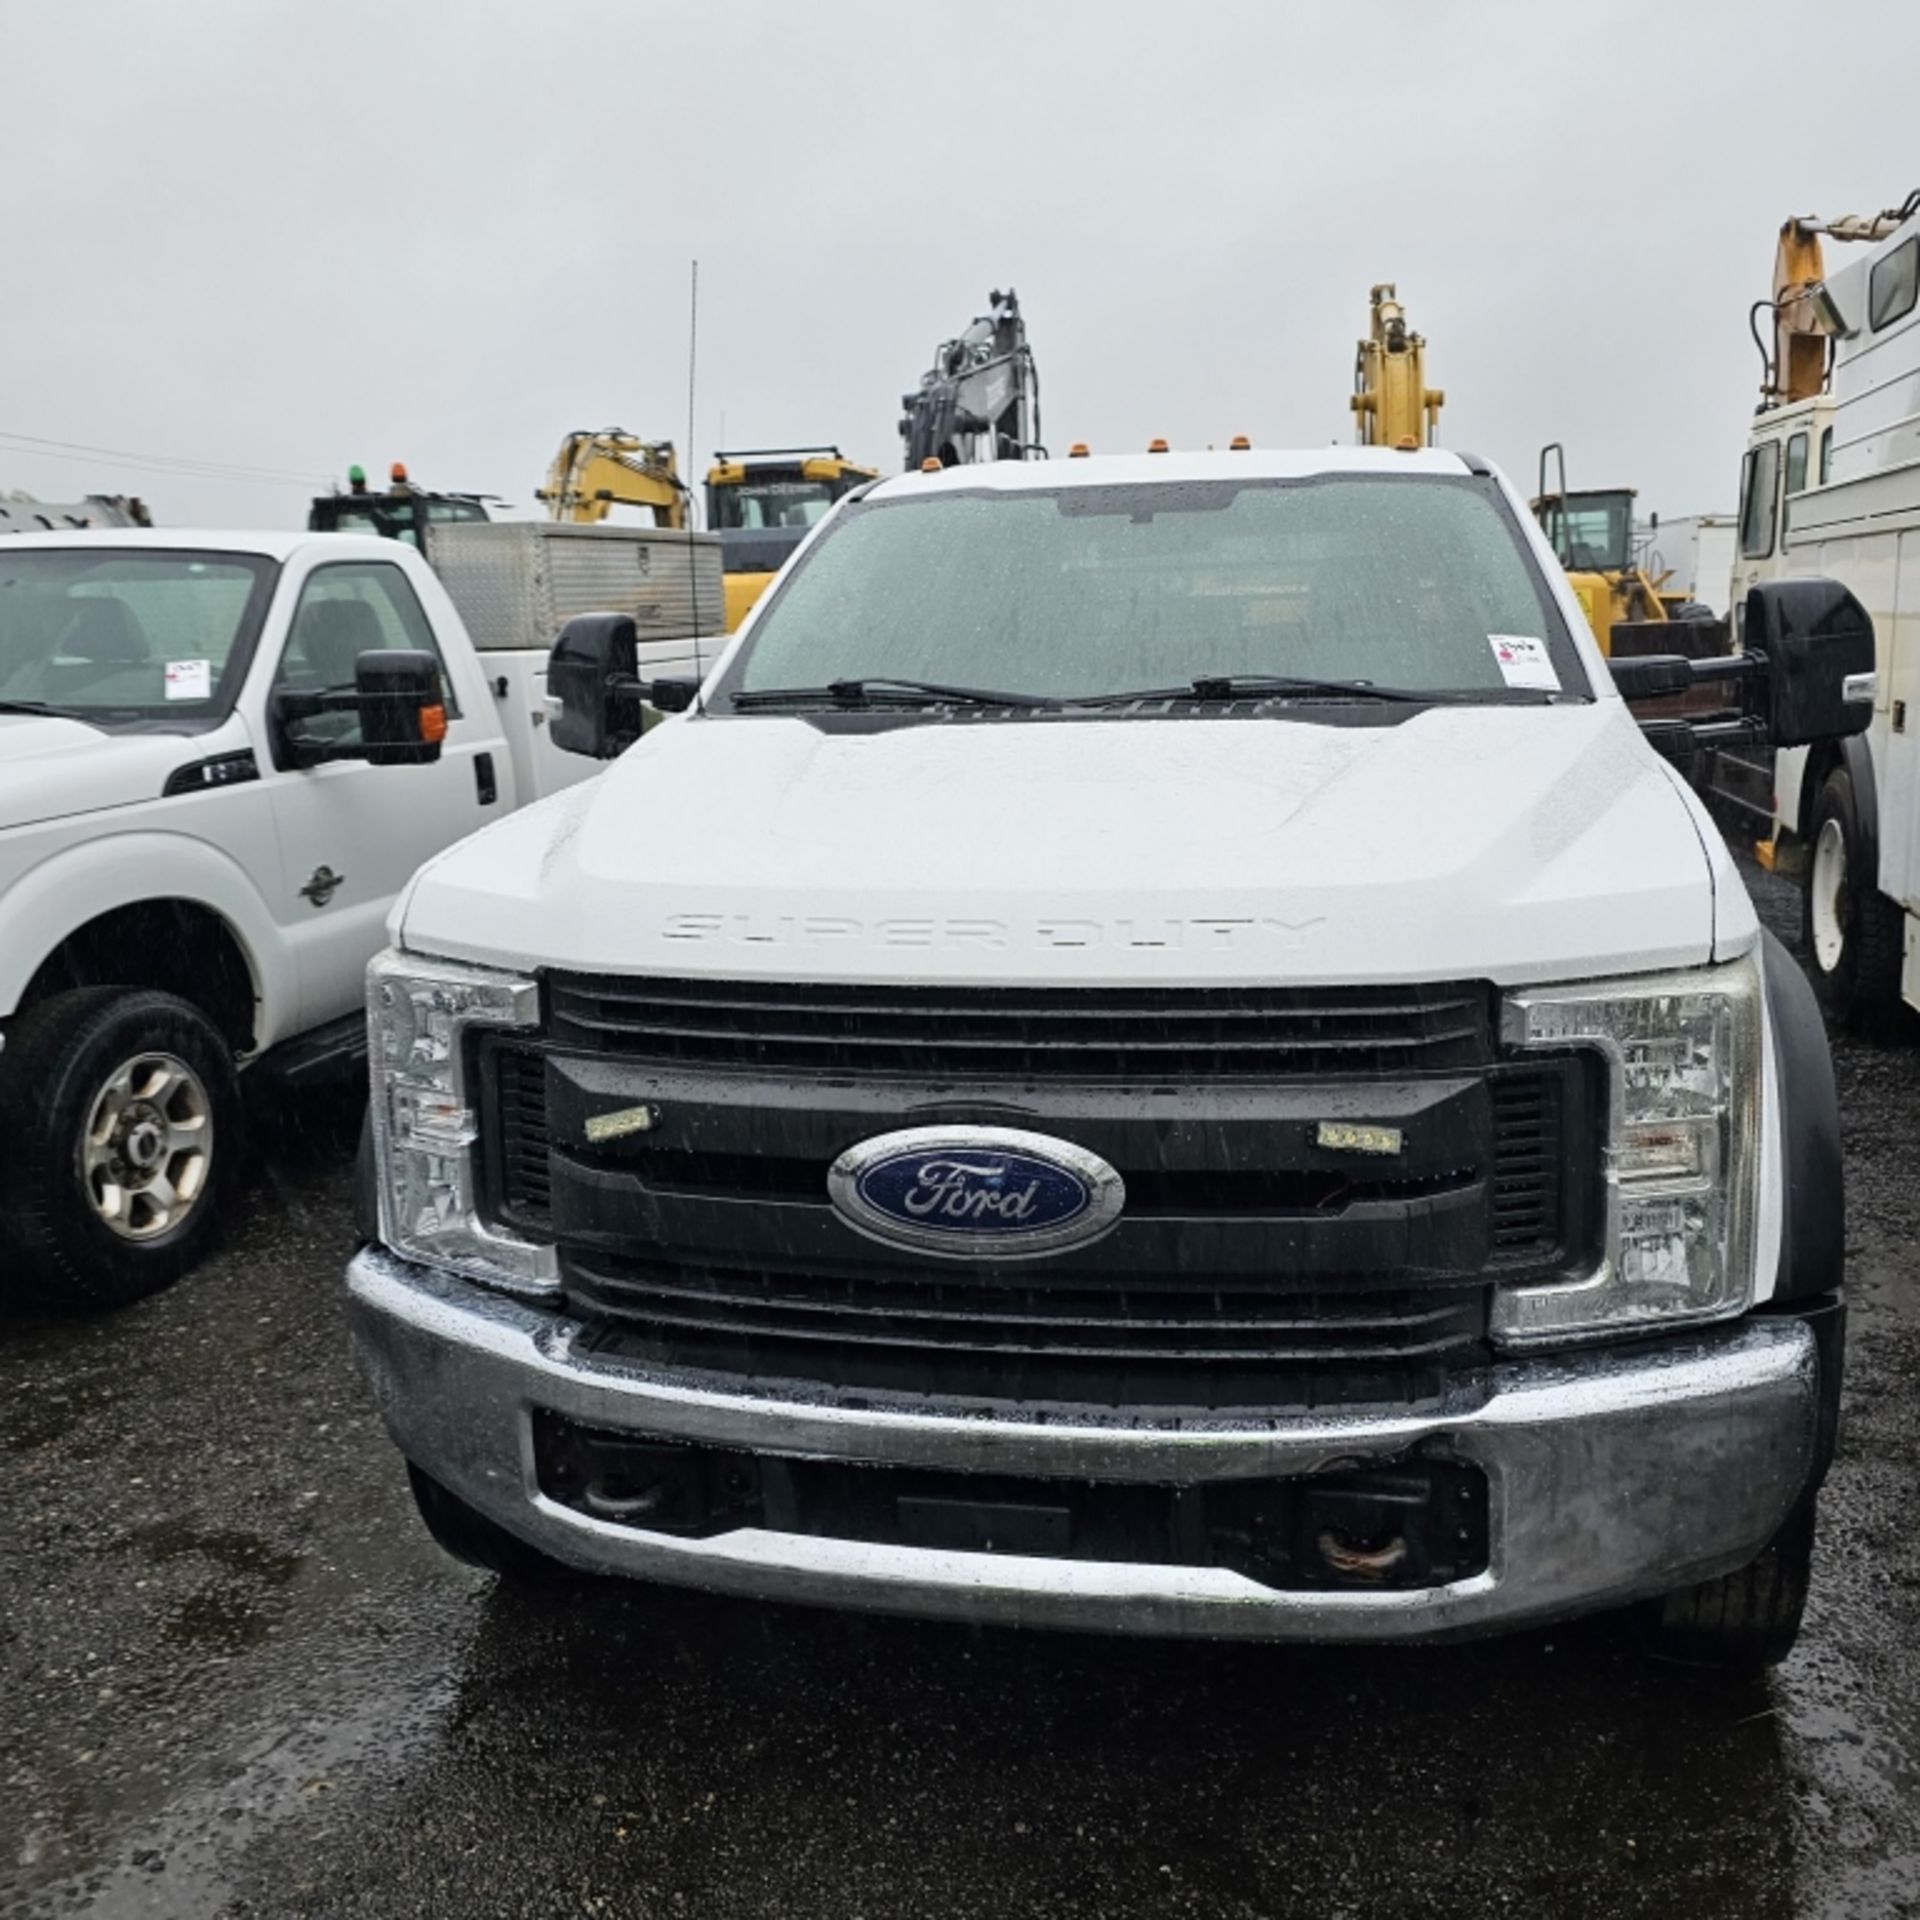 2017 Ford F350 Flatbed - Image 3 of 9